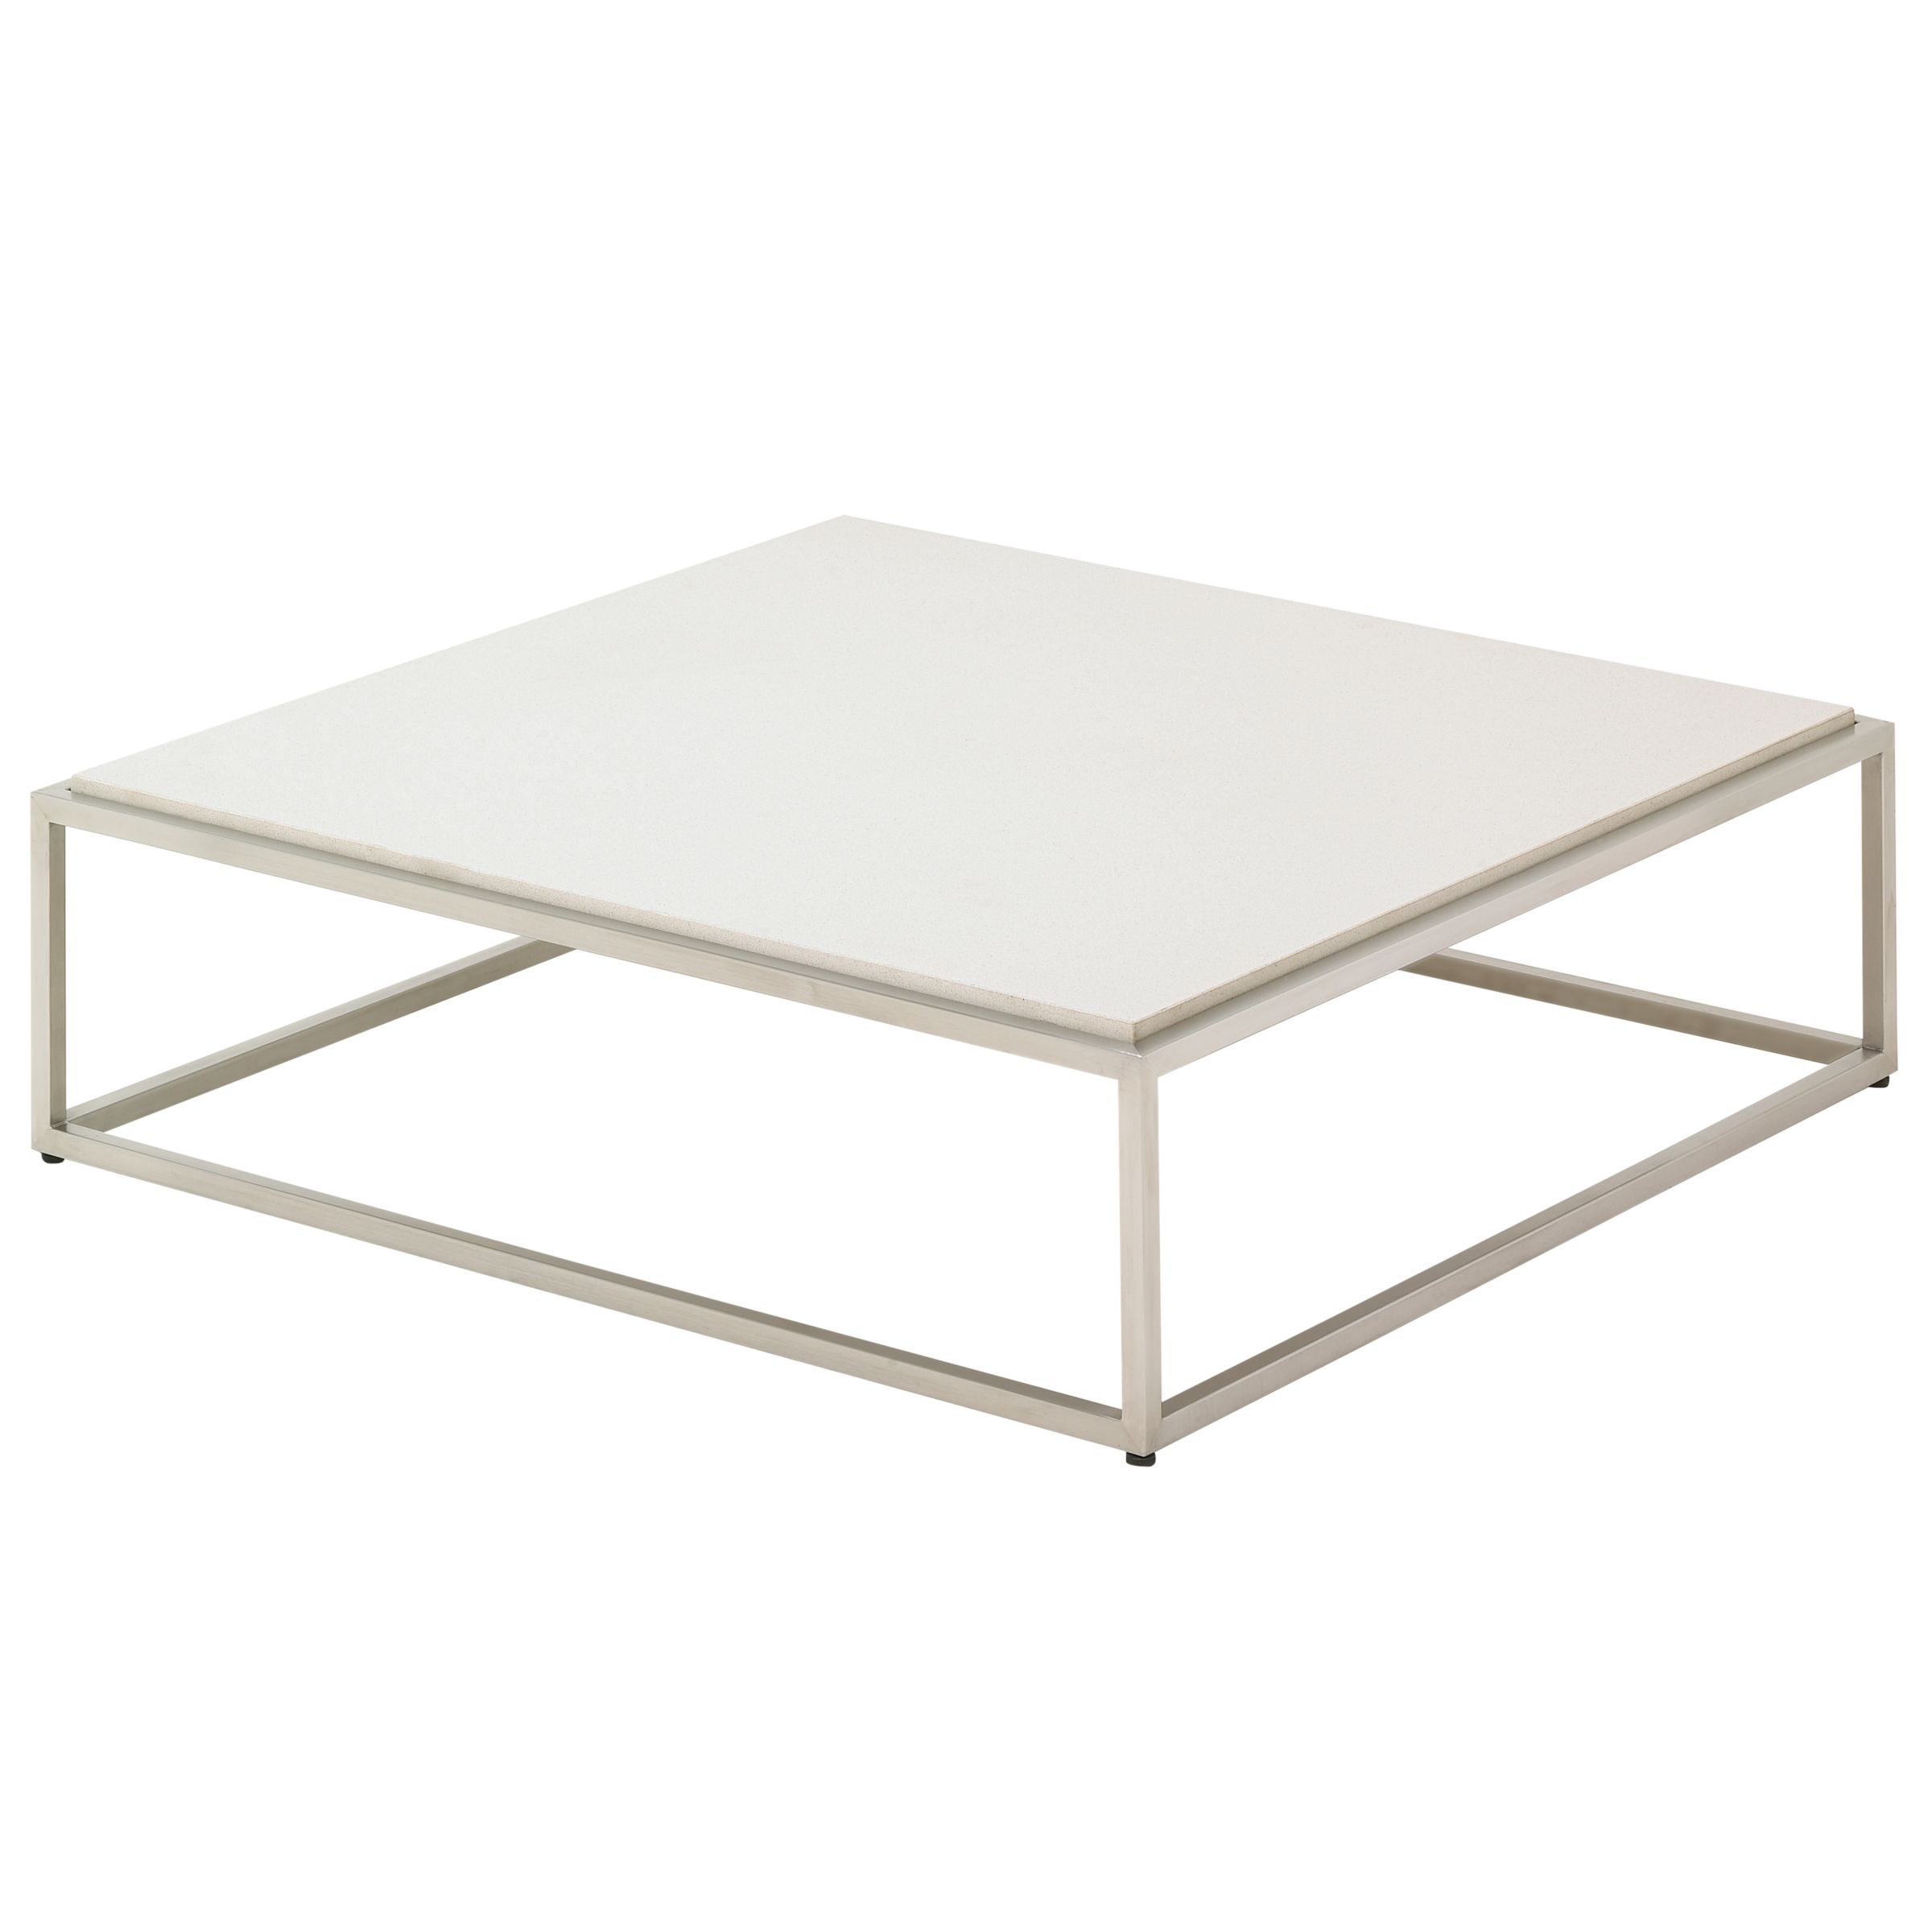 Gloster Cloud Square Outdoor Coffee Table, Quartz Top, Ivory,100 x 100cm, width 100cm